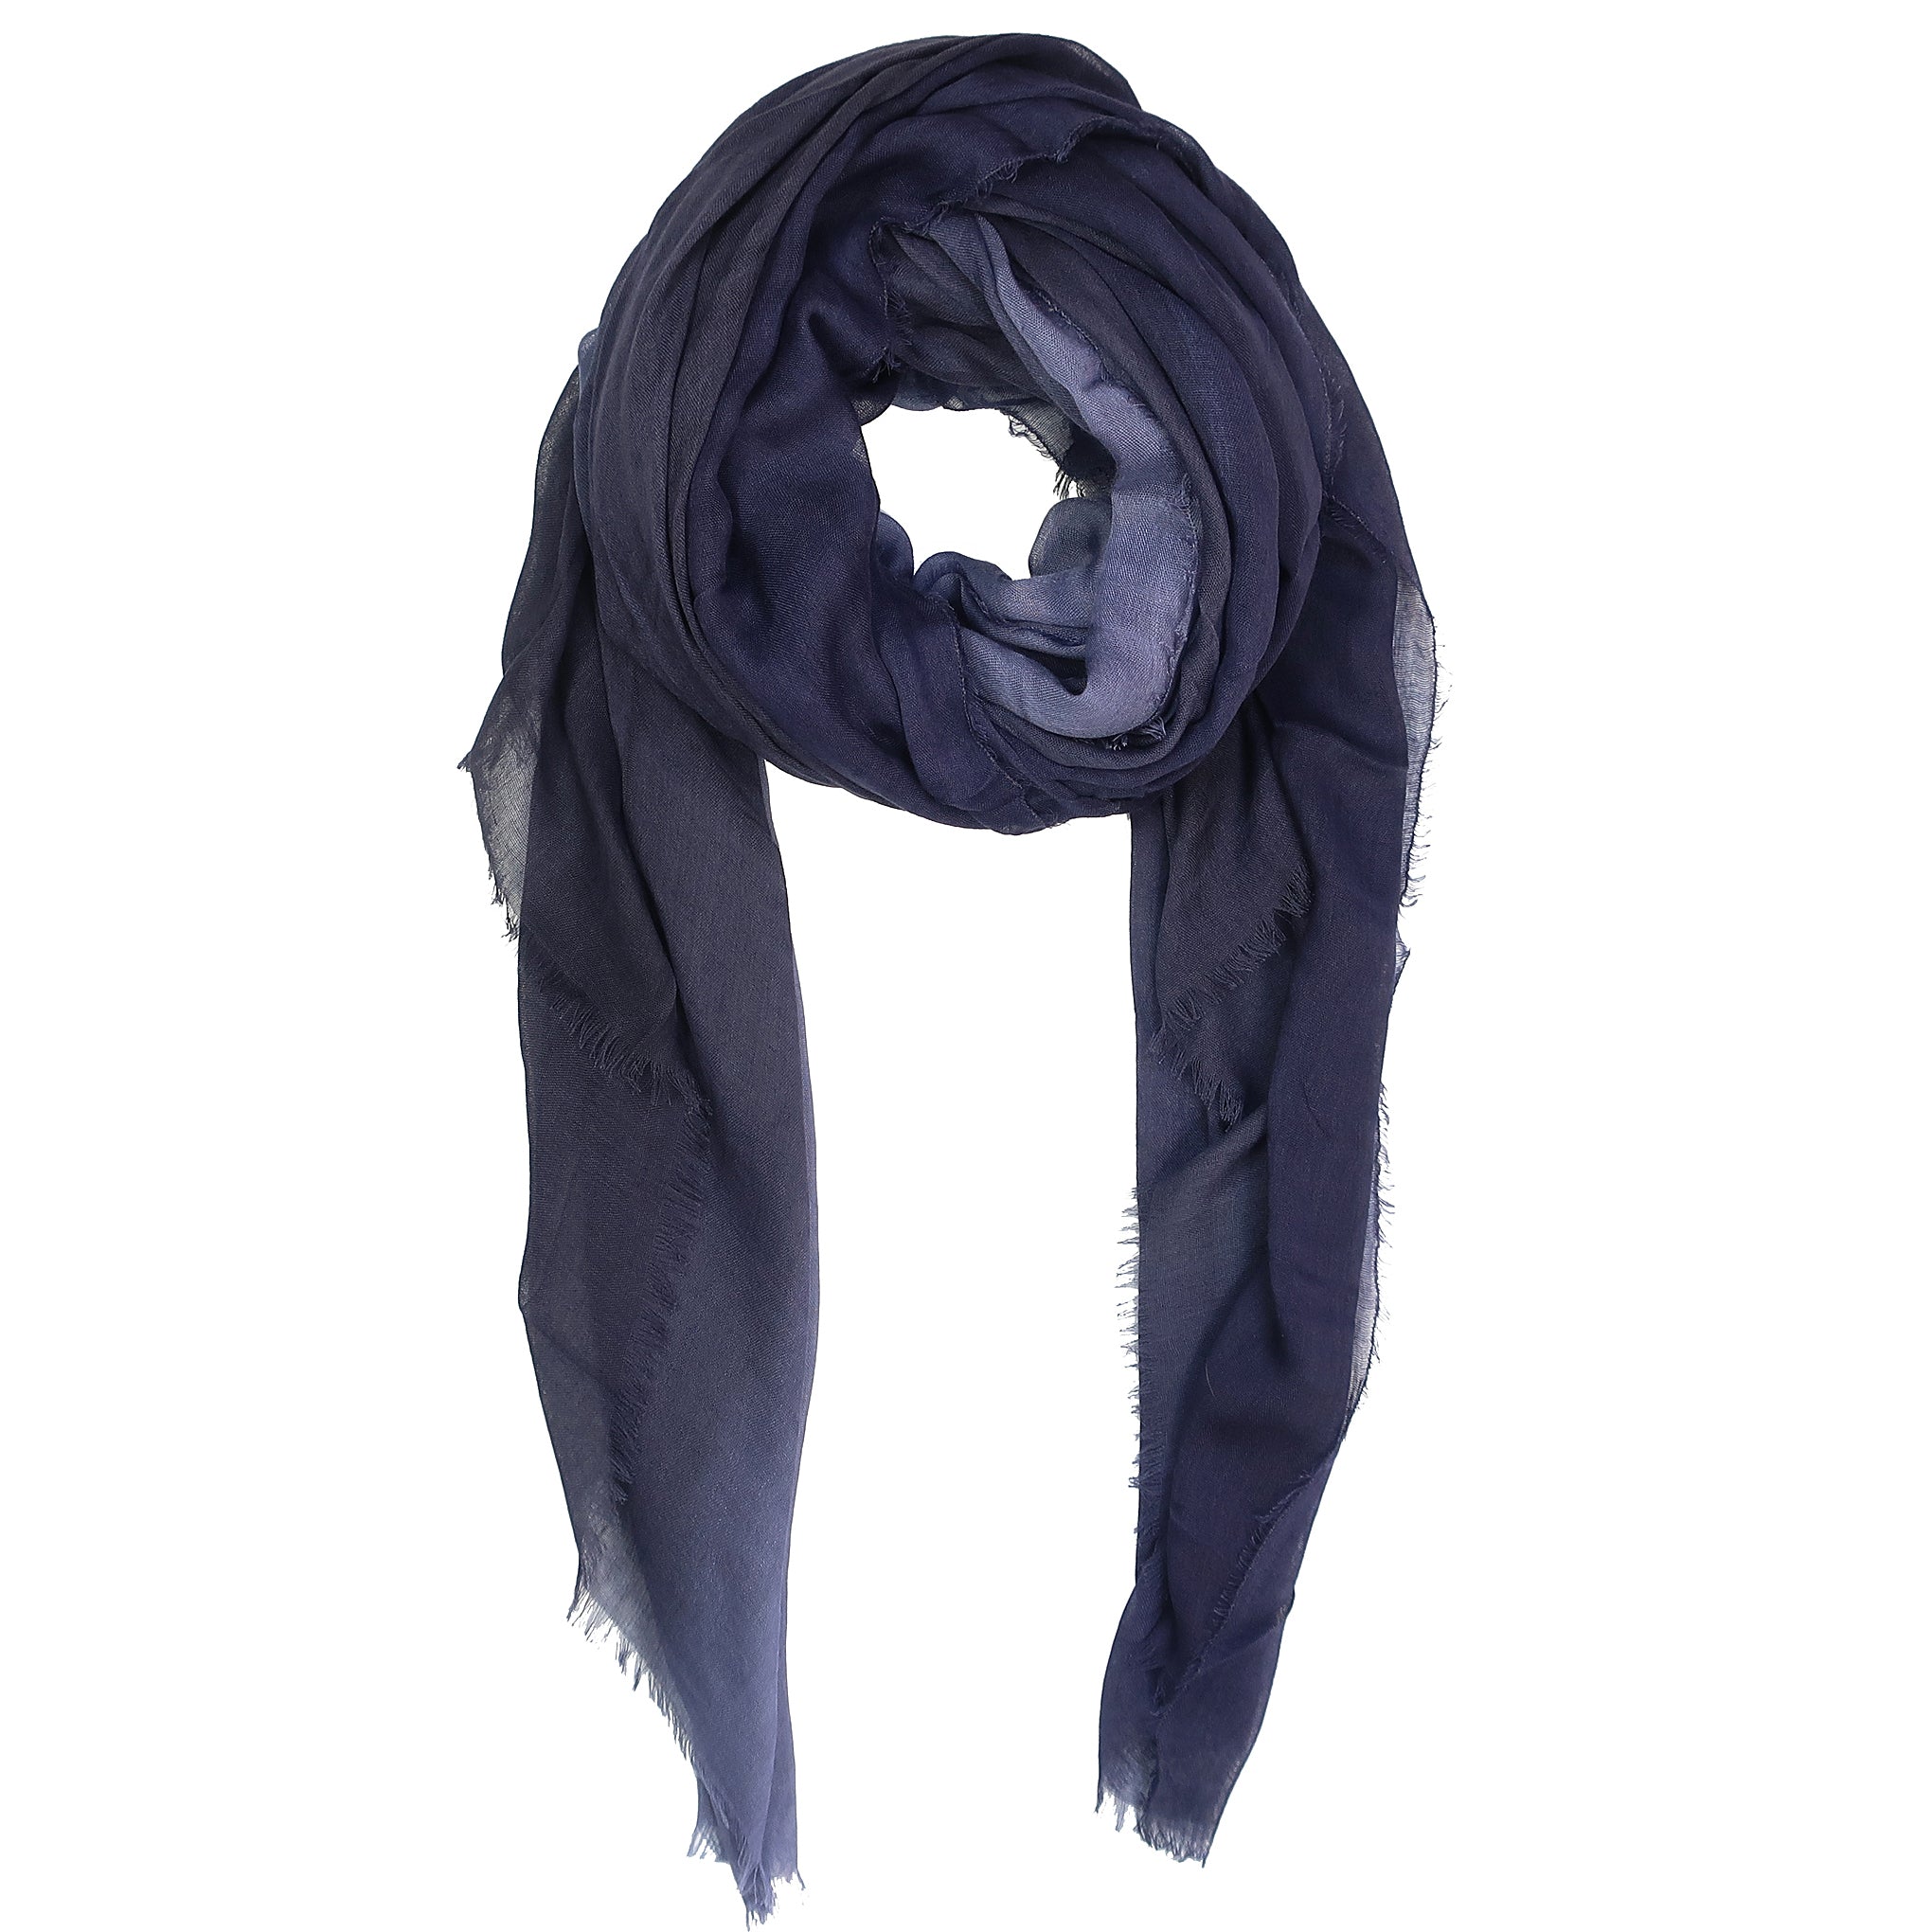 Blue Pacific Dream Cashmere and Silk Scarf in Vintage Indigo and Gray 47 x 37